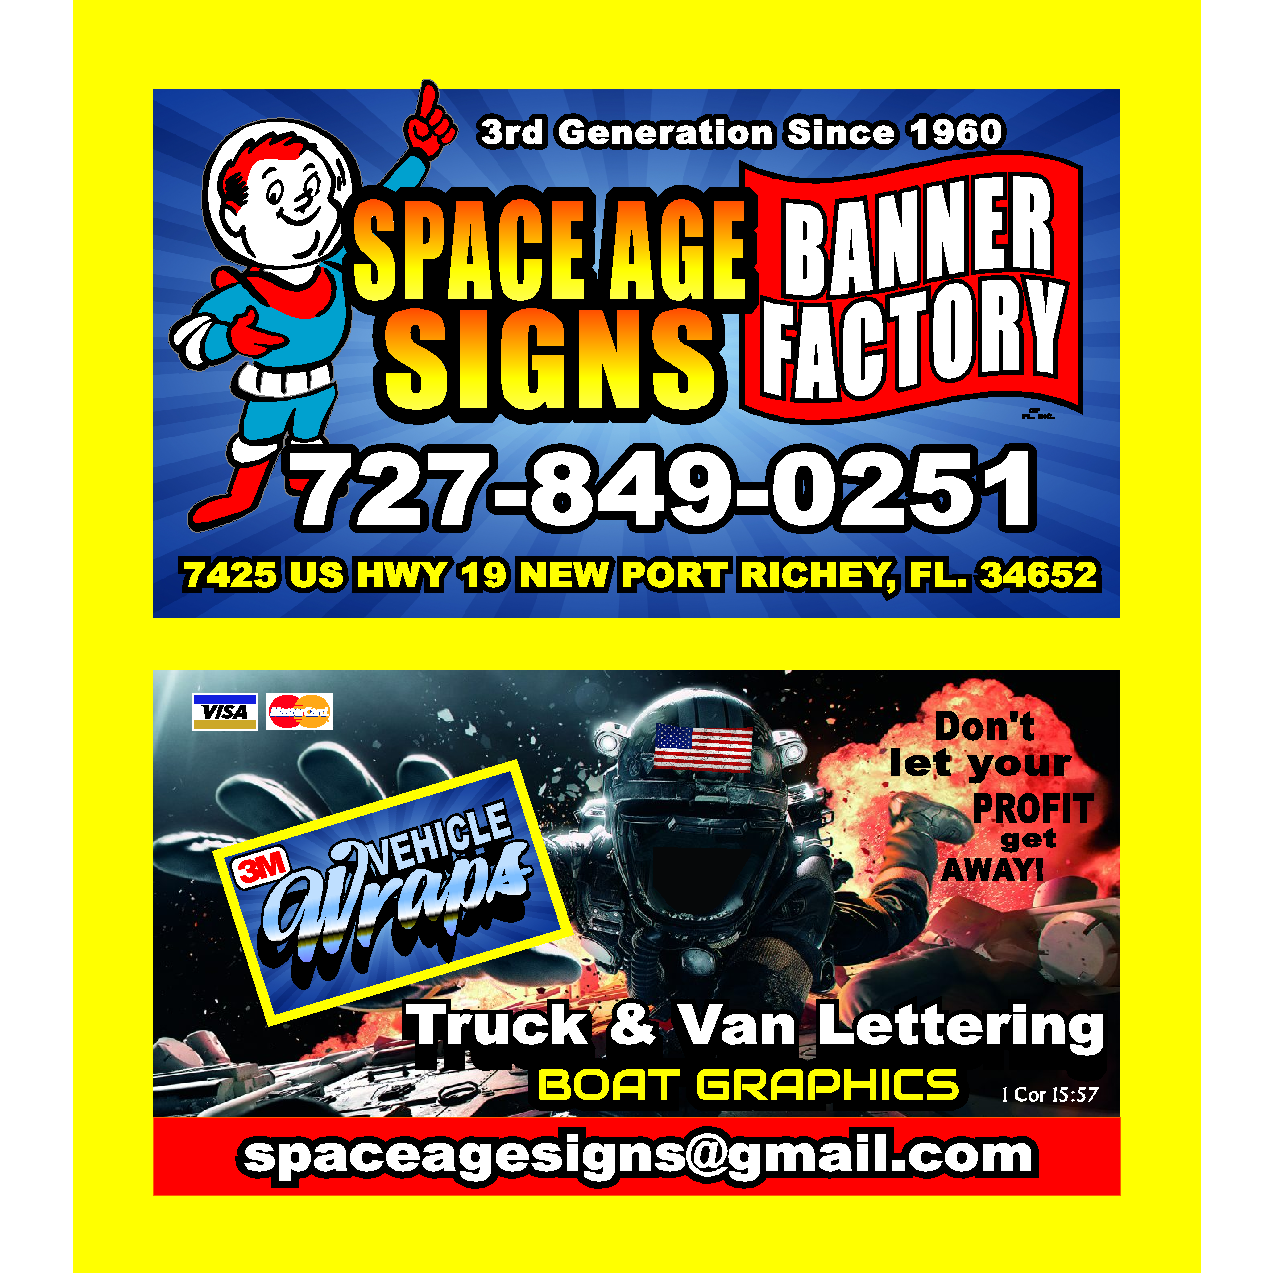 Space Age Signs Banner Factory Of Florida Inc. Logo